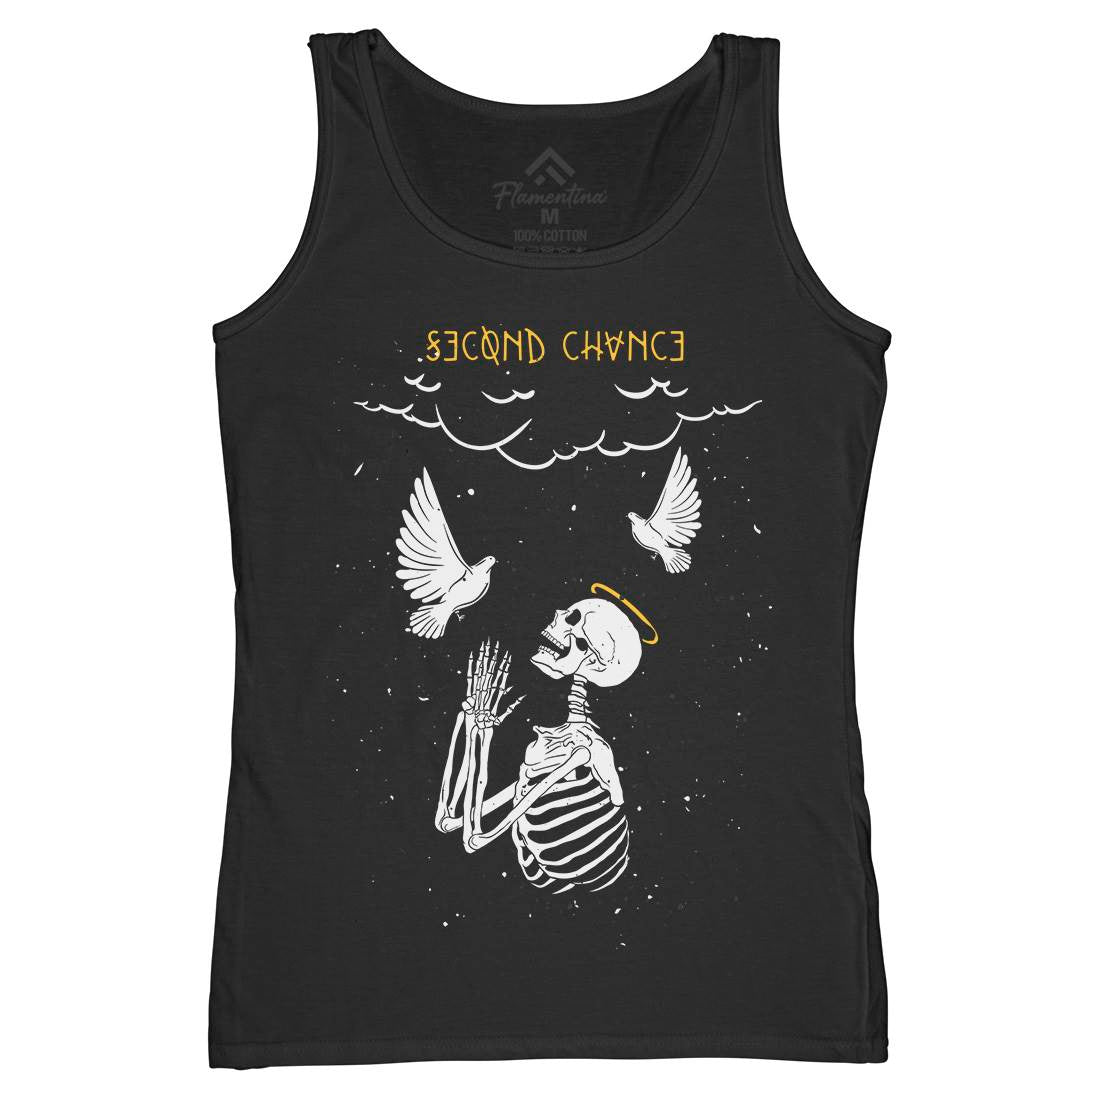 Second Chance Womens Organic Tank Top Vest Quotes D484